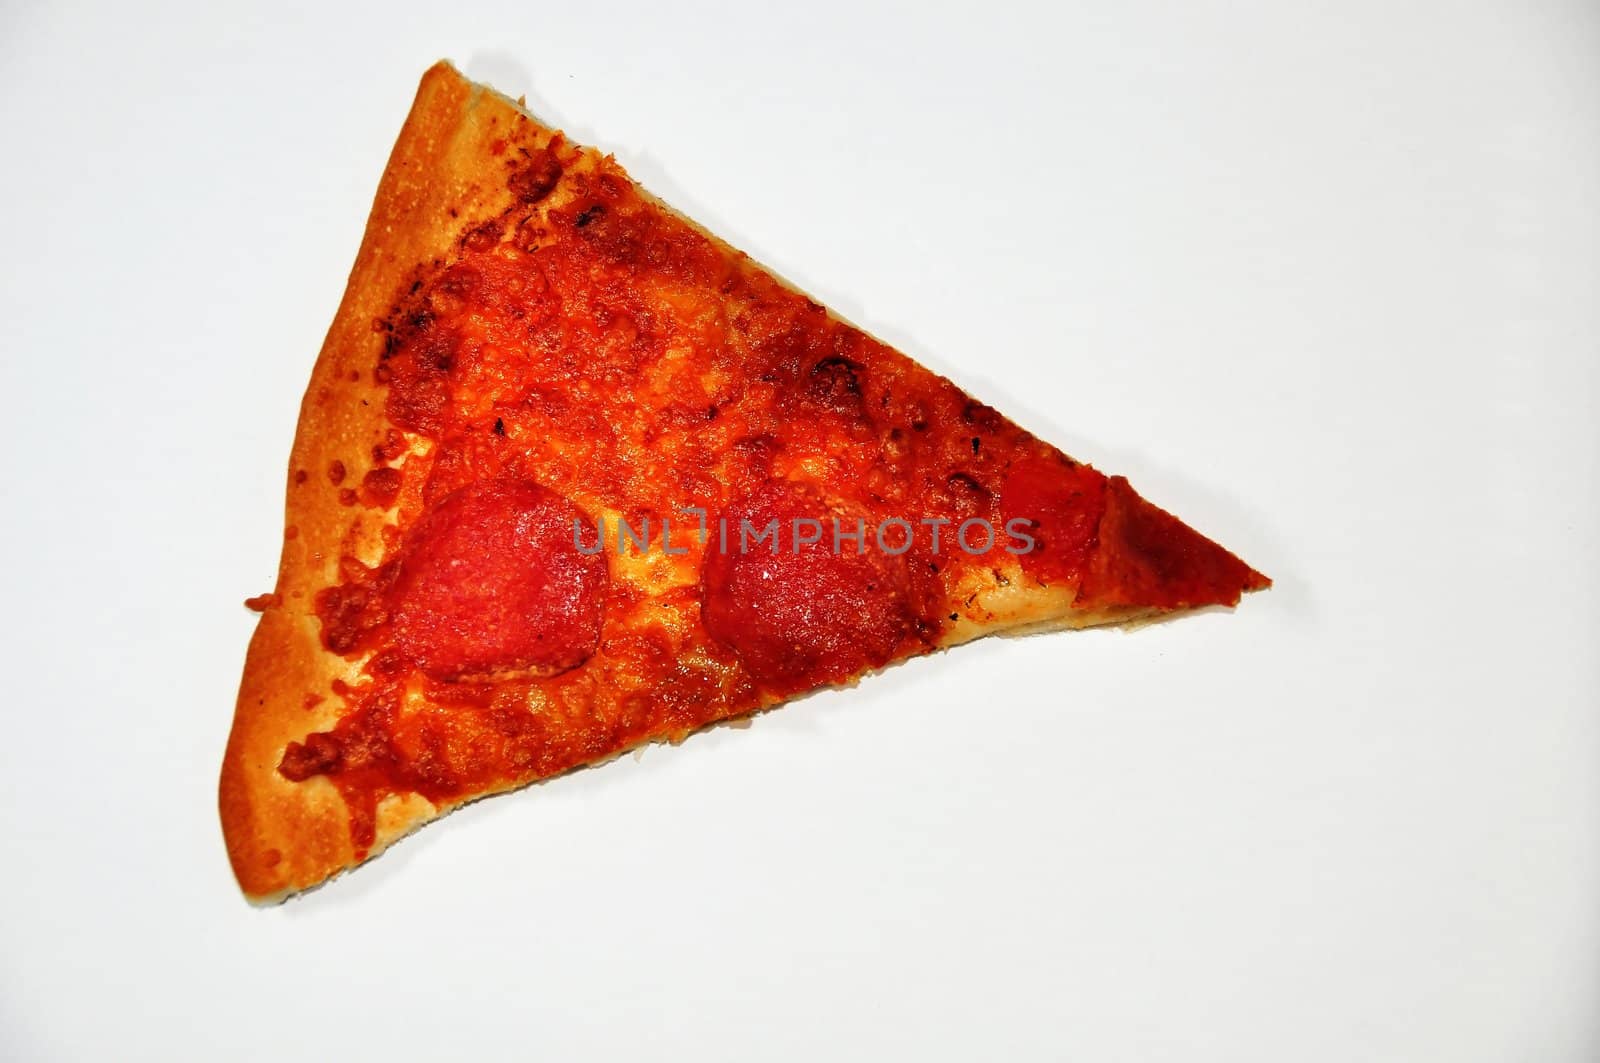 pizza on white background by arnelsr